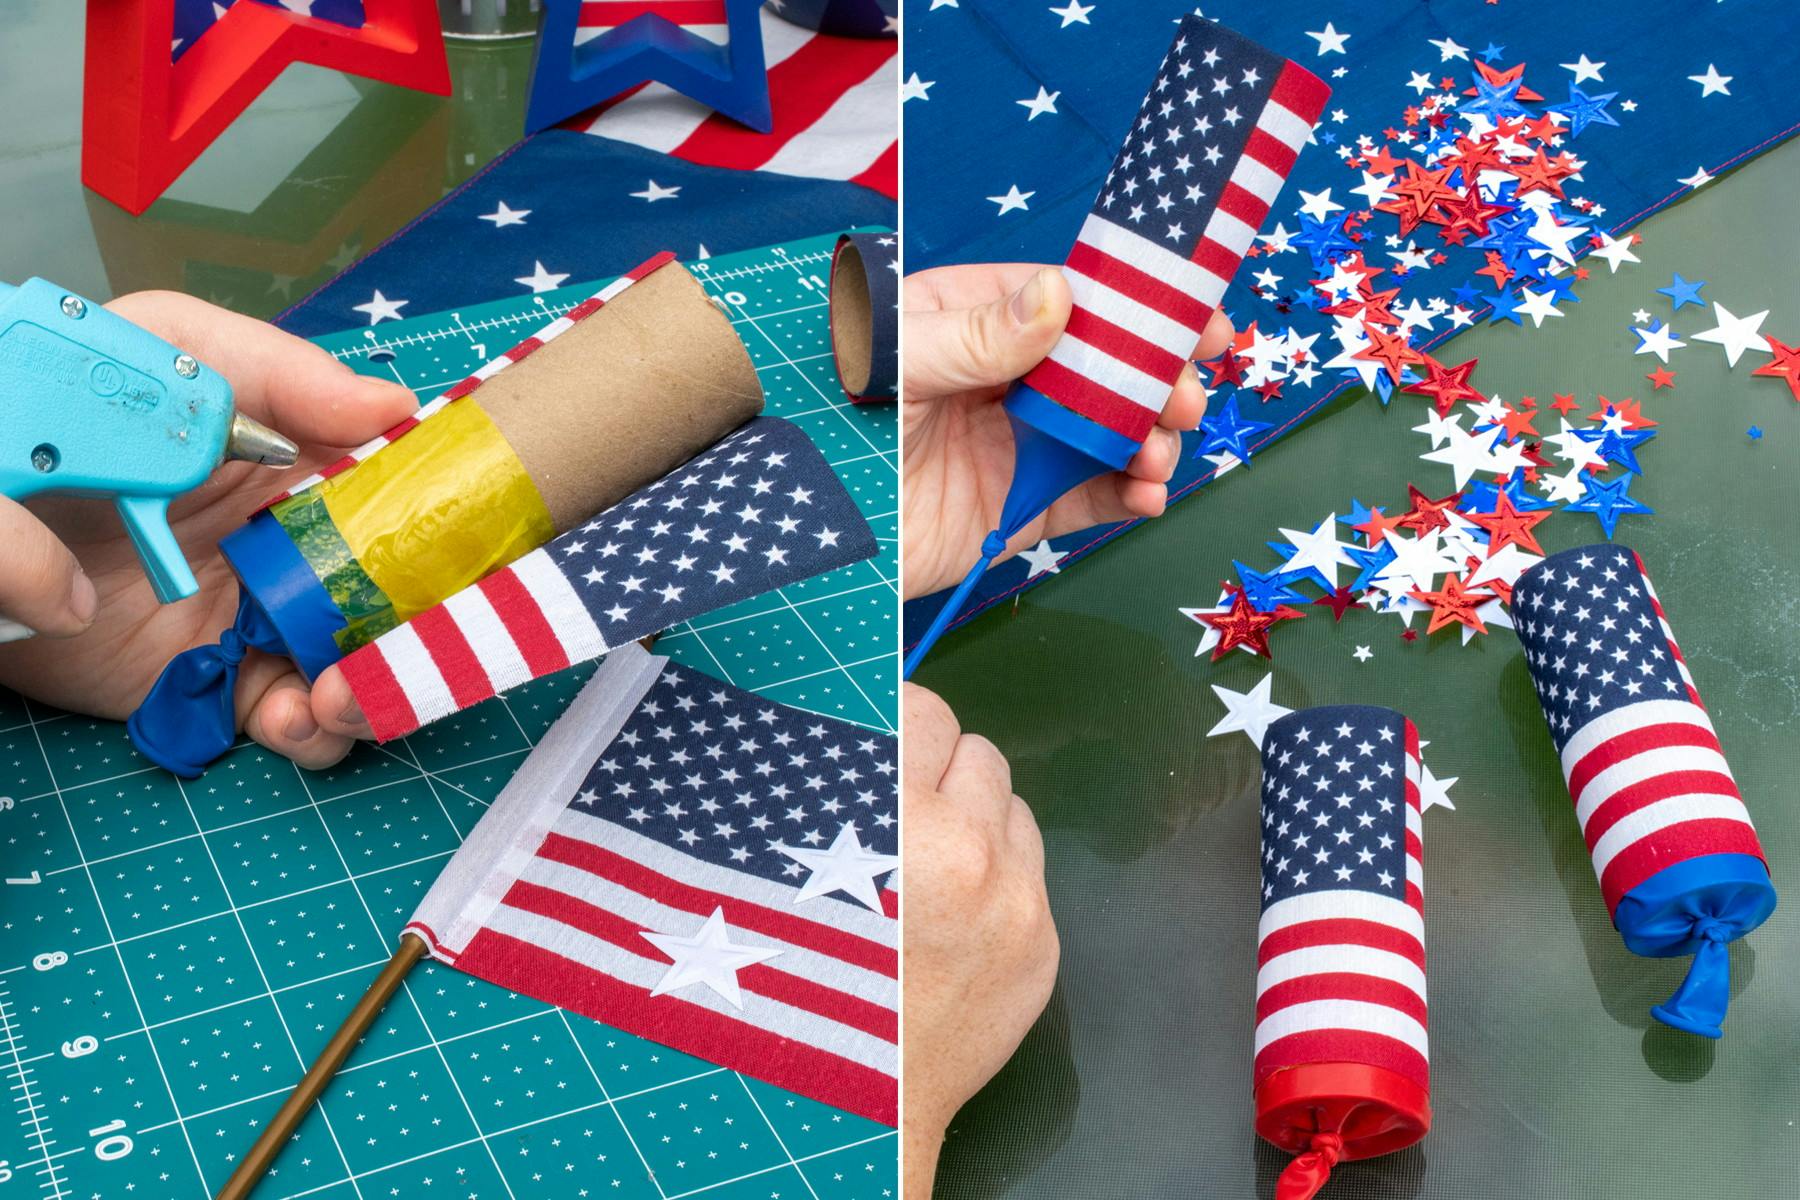 A person's hands using a hot glue gun to glue a small American flag around a toilet paper roll that has a cut balloon taped to the end, and three completed confetti poppers, on a table with red, white, and blue confetti scattered around.